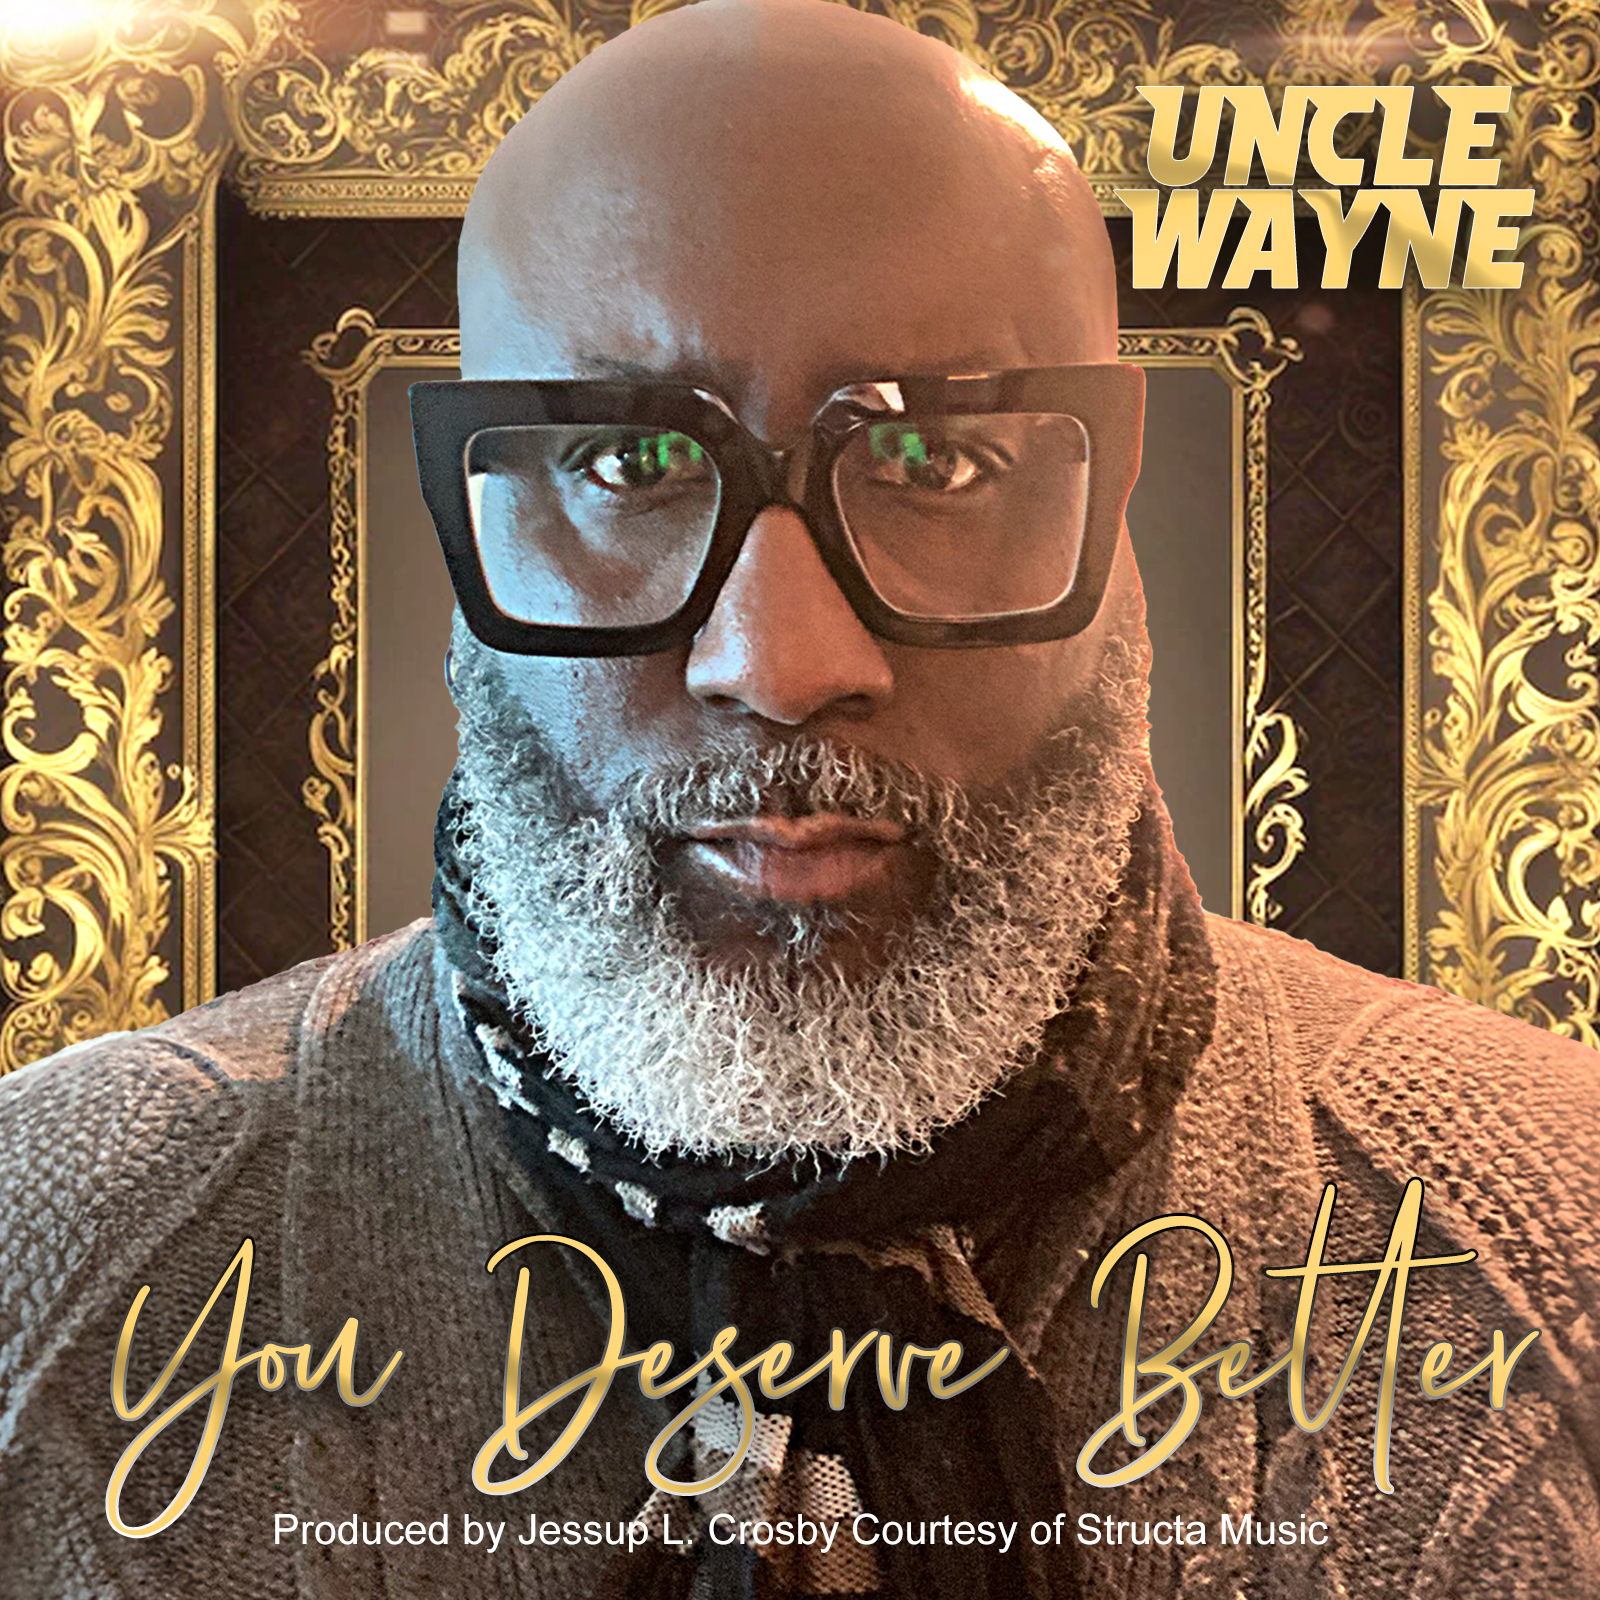 Art for You Deserve Better by Uncle Wayne